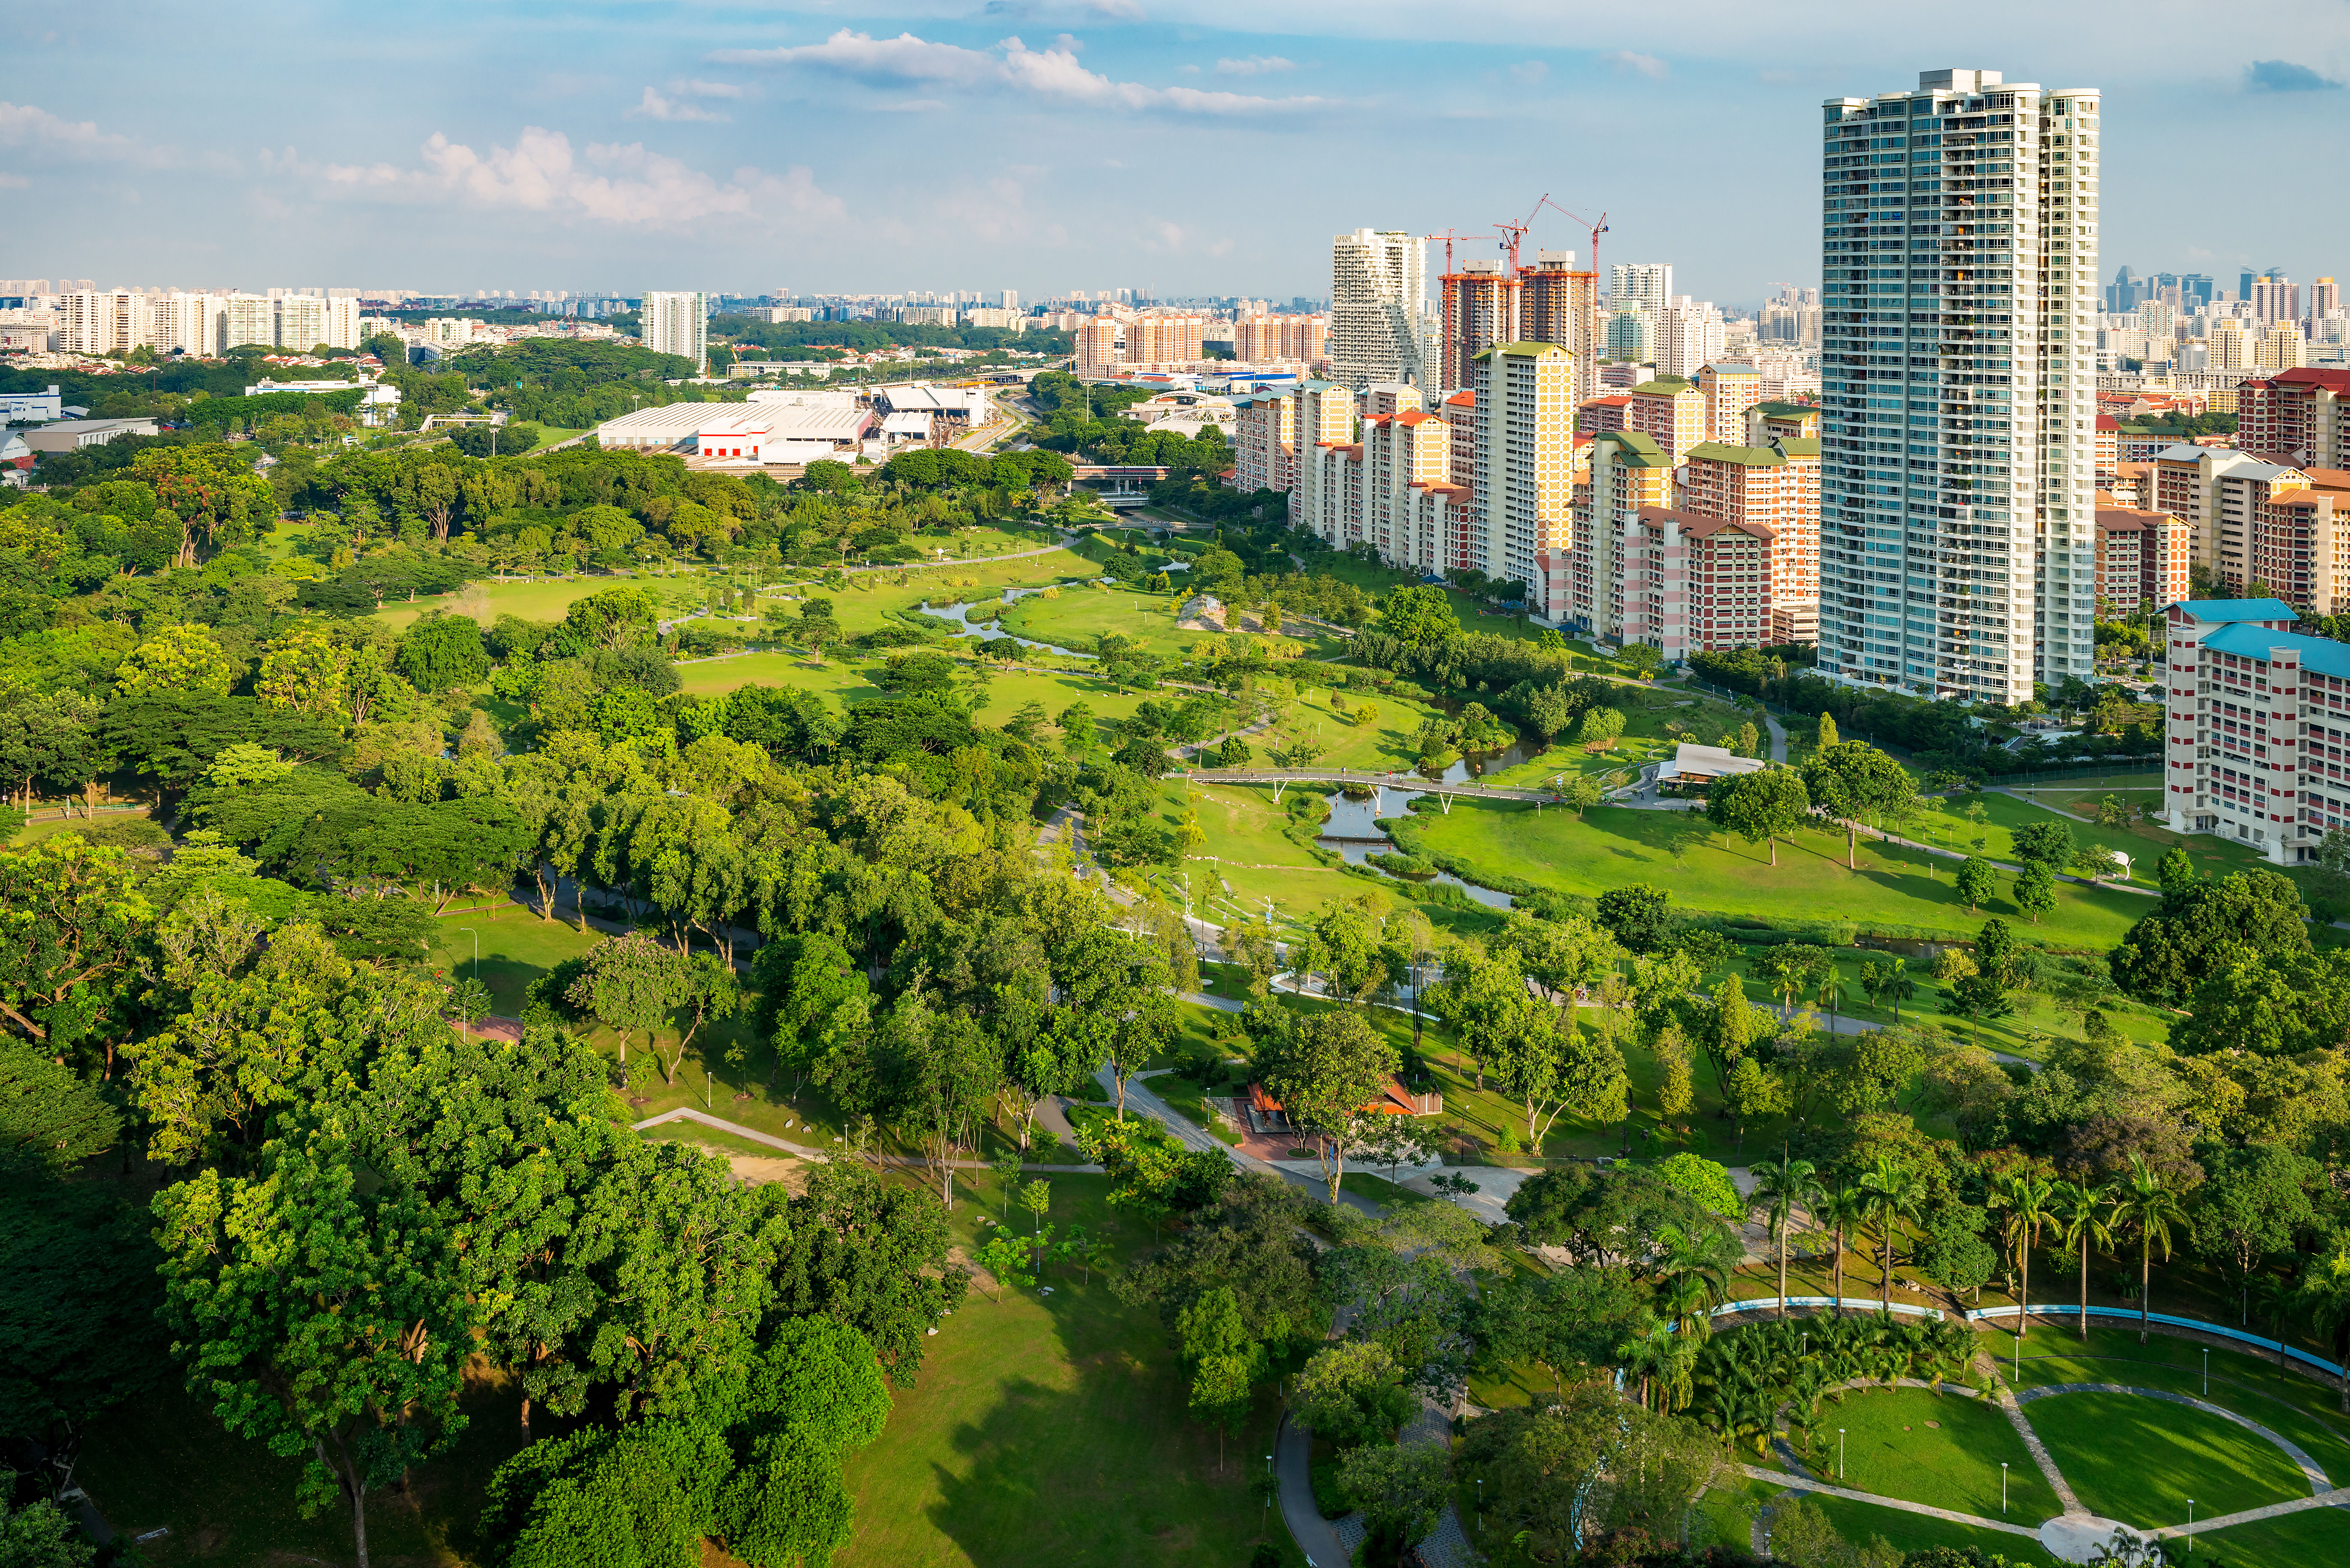 Bishan-Ang Mo Kio Park, designed by Ramboll Studio Dreiseitl, CH2MHill and Peter Geitz. ​ Image: Ramboll Studio Dreiseitl